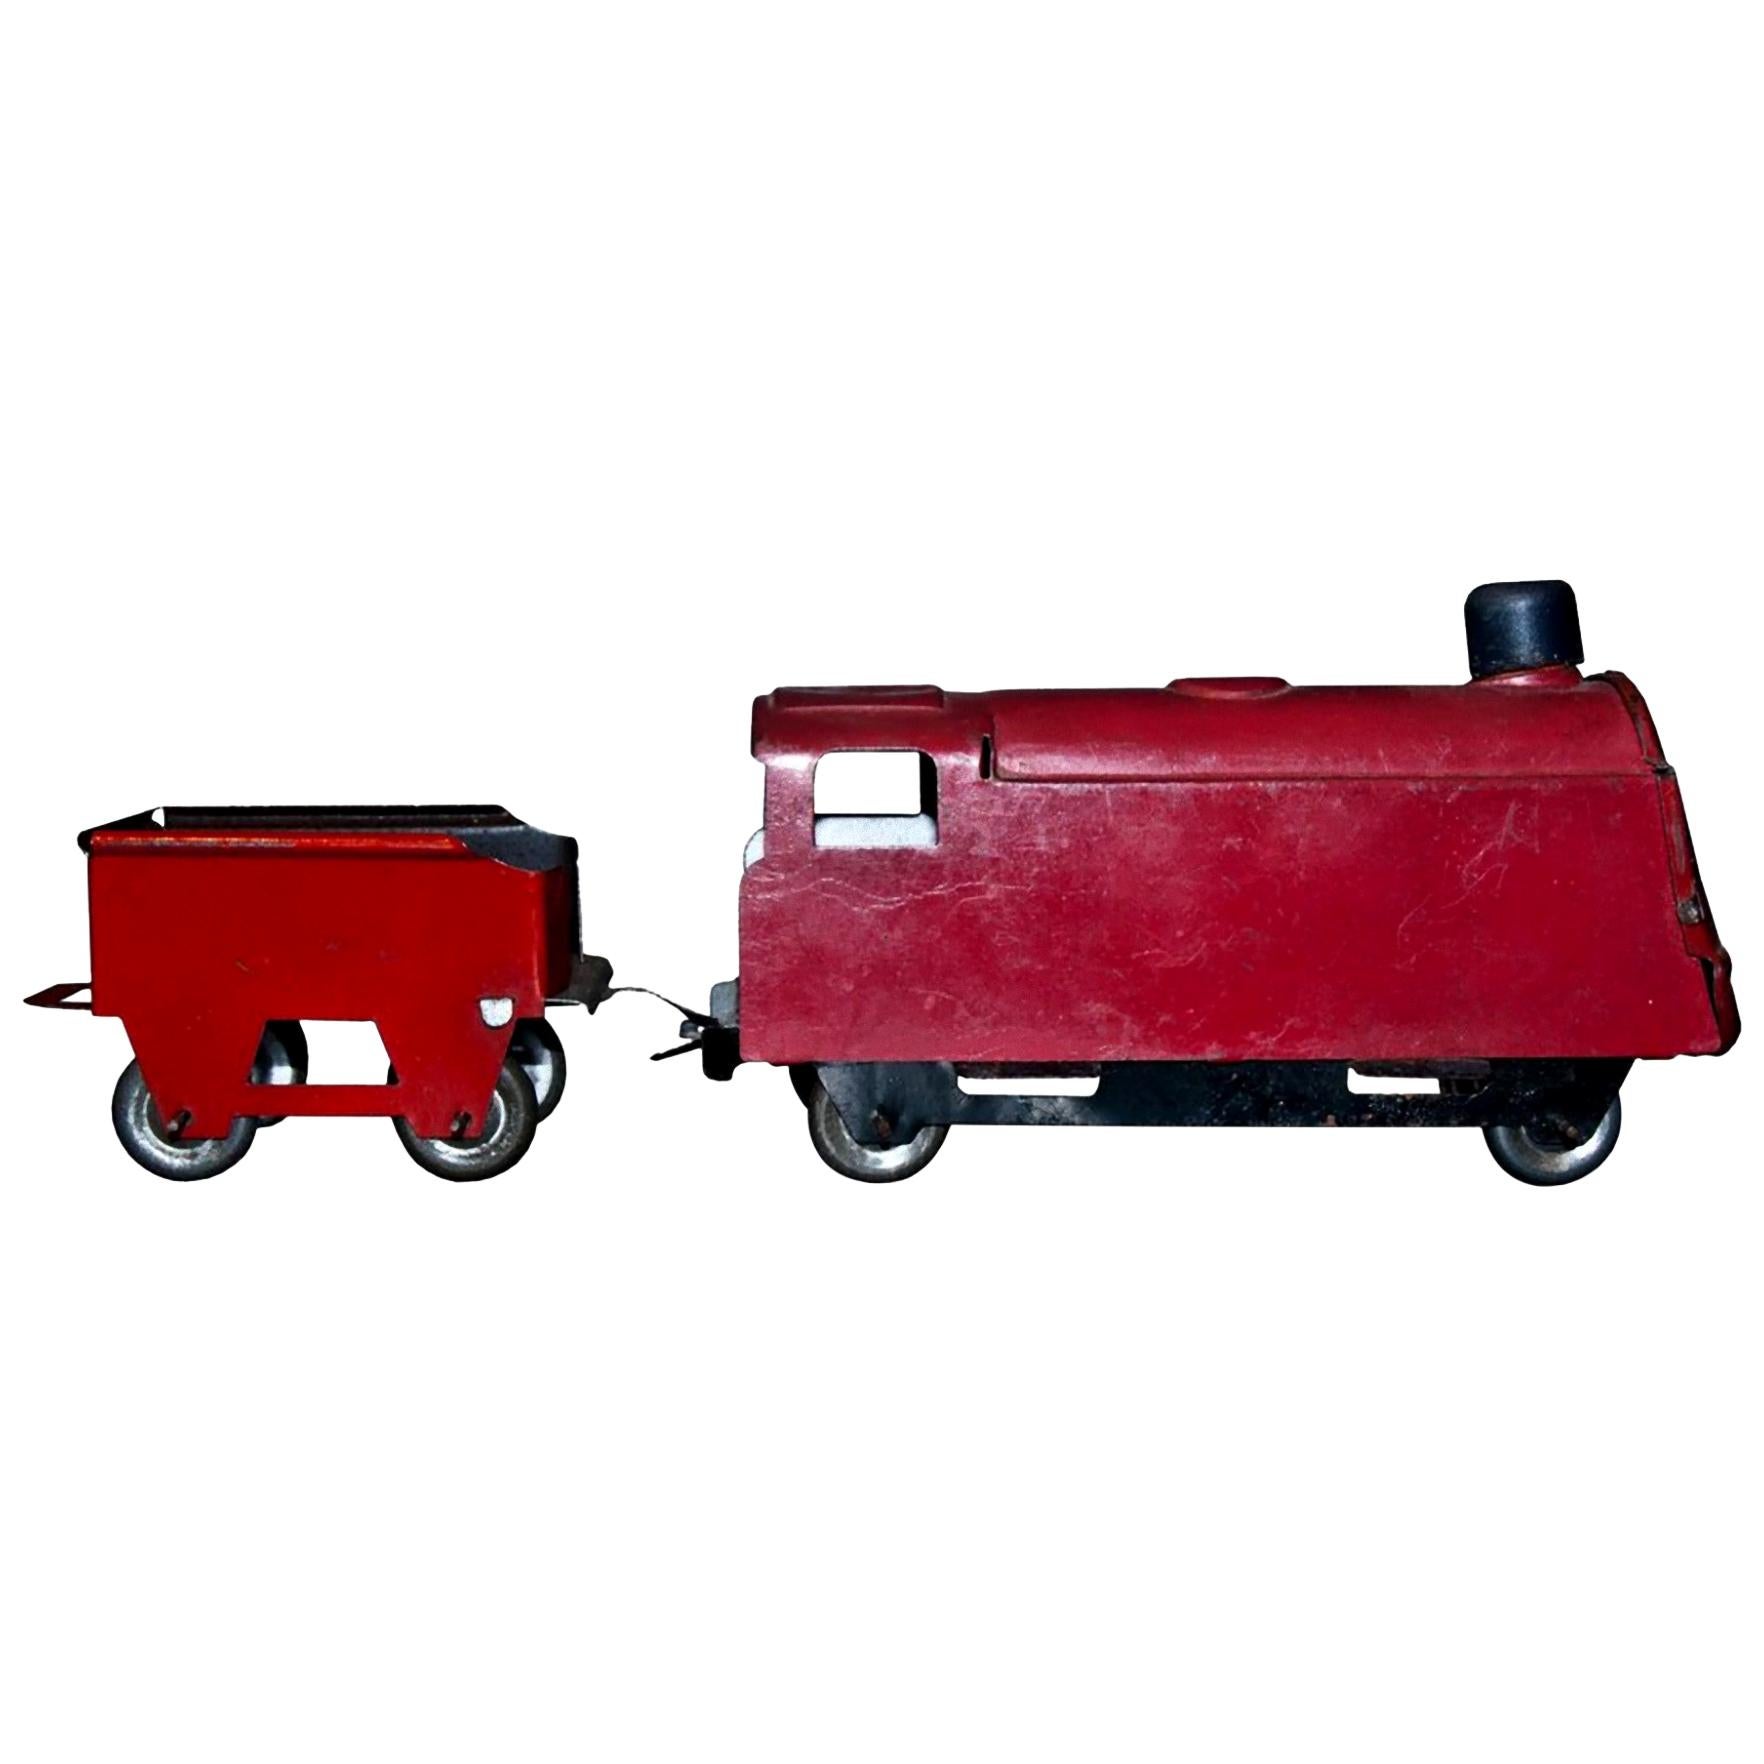 Original Vintage Toy, Small Train and Trailer, 1920s